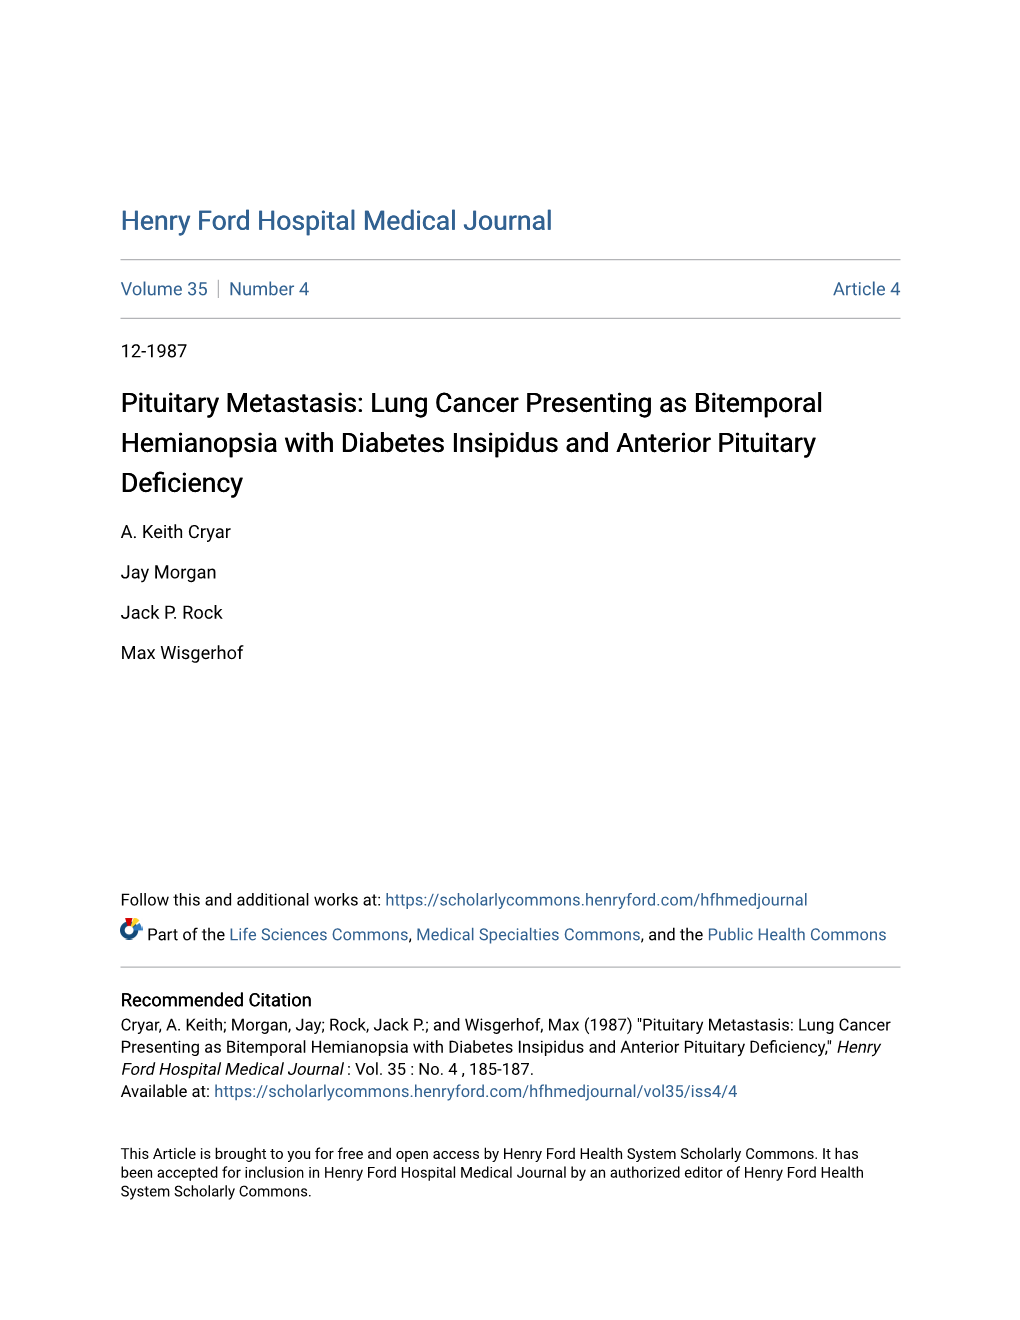 Lung Cancer Presenting As Bitemporal Hemianopsia with Diabetes Insipidus and Anterior Pituitary Deficiency